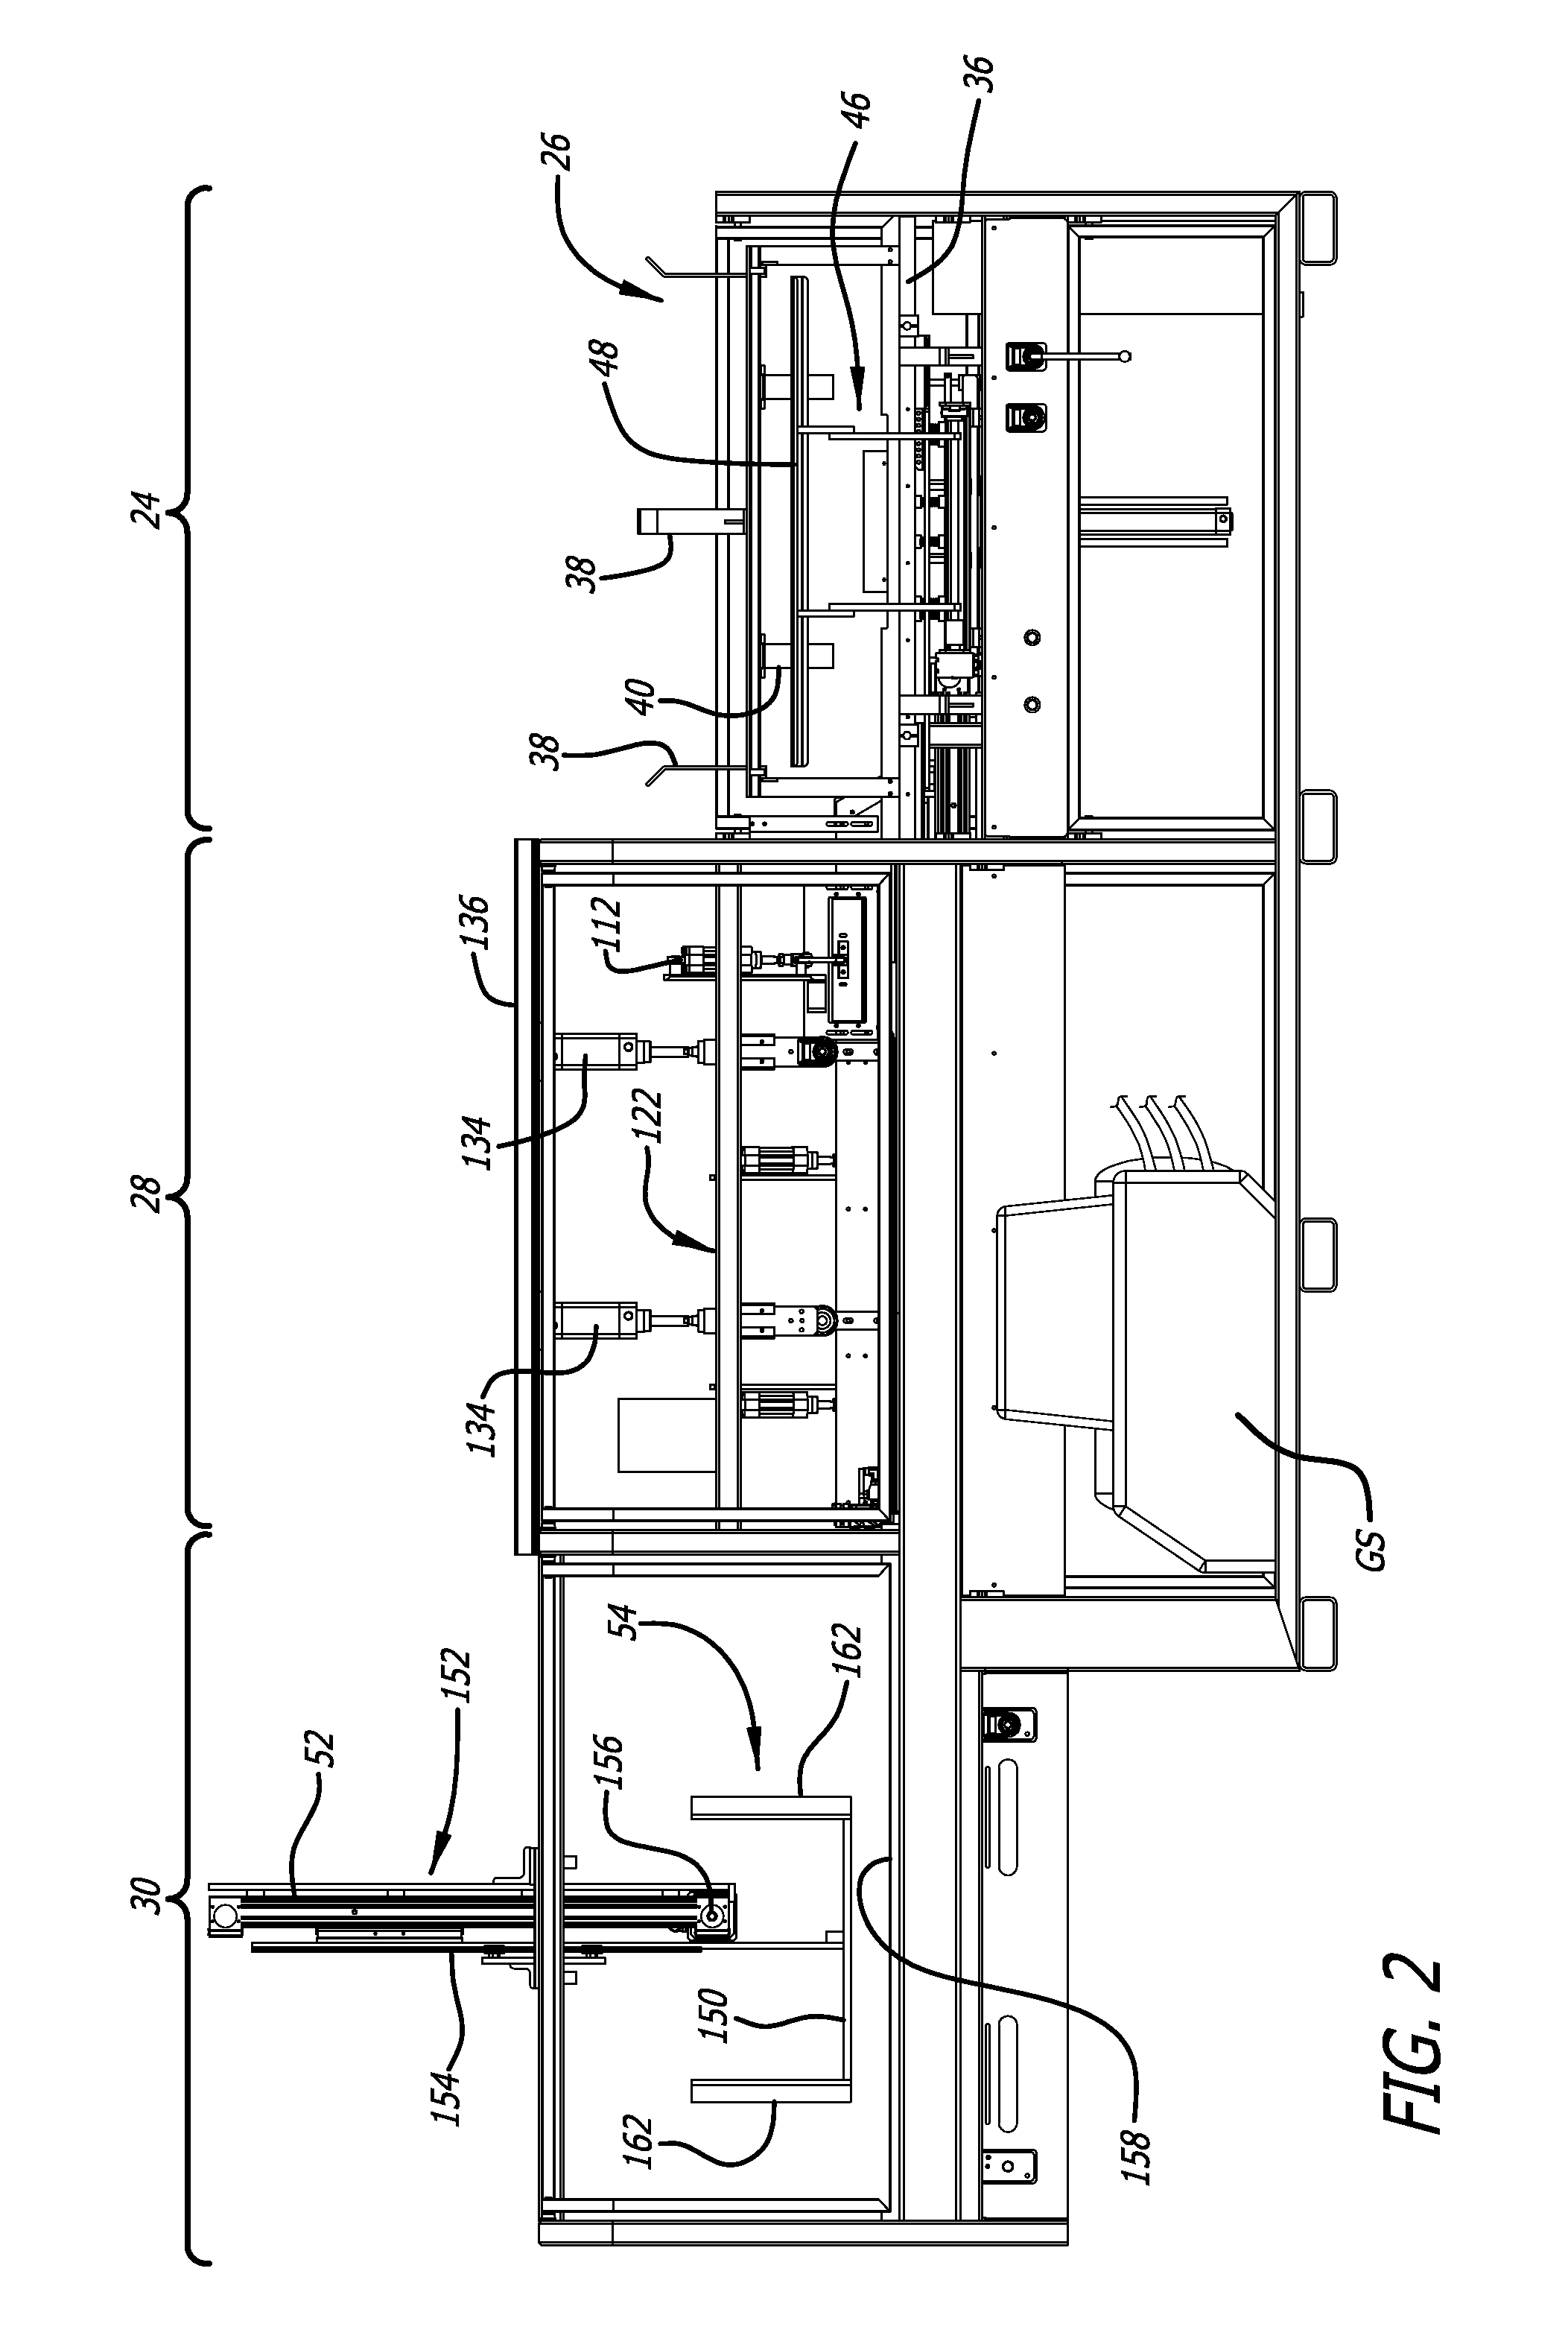 Apparatus and methods for folding paper boxes